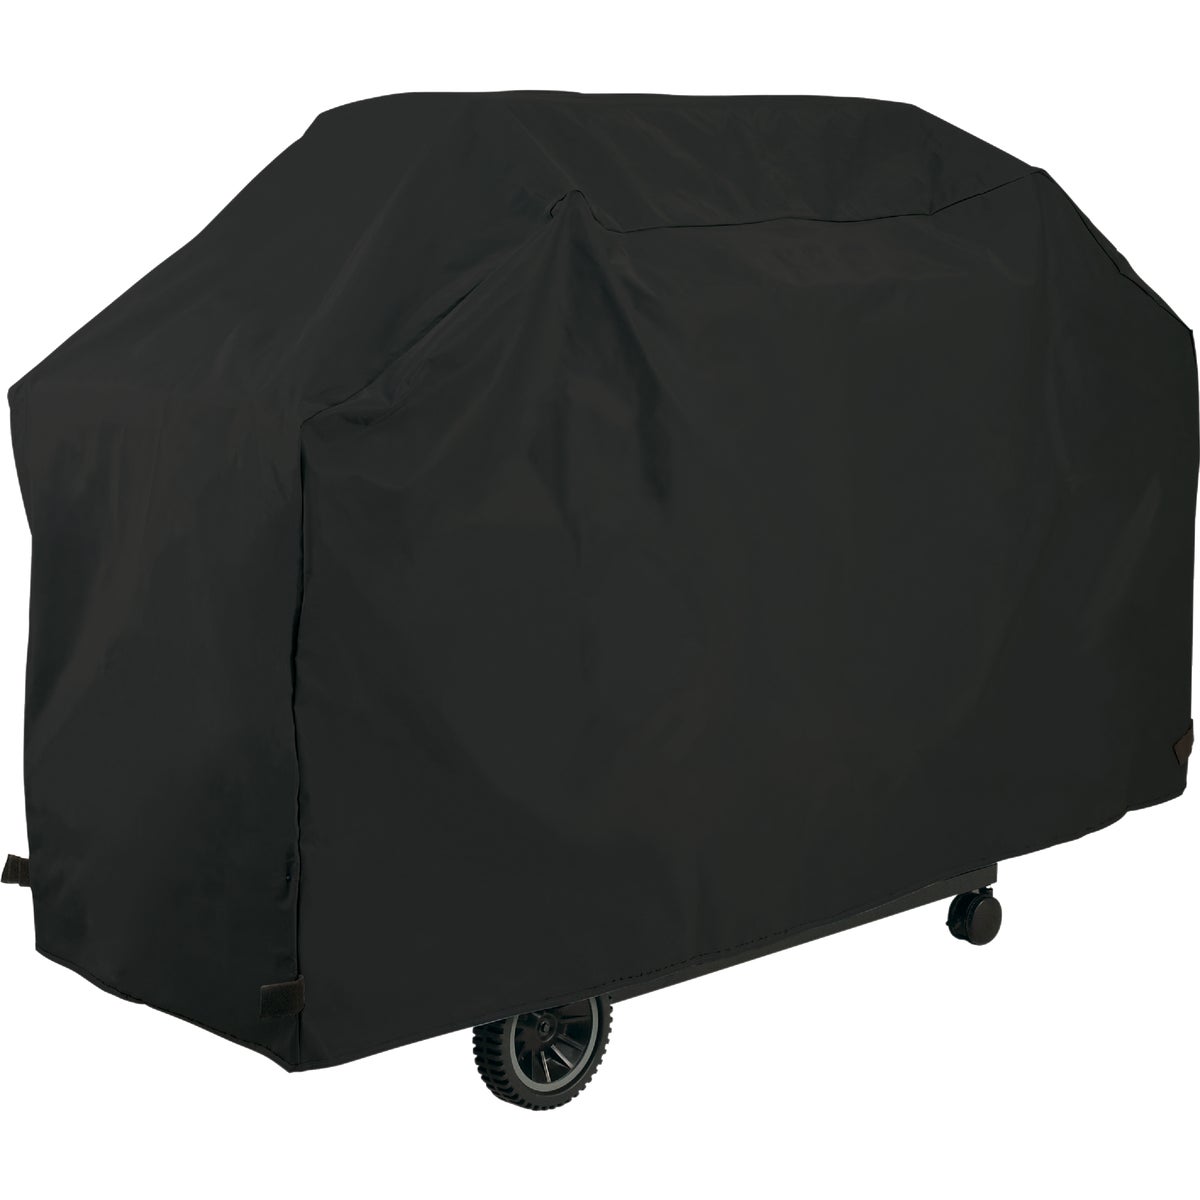 GrillPro 70 In. Black PVC Deluxe Grill Cover